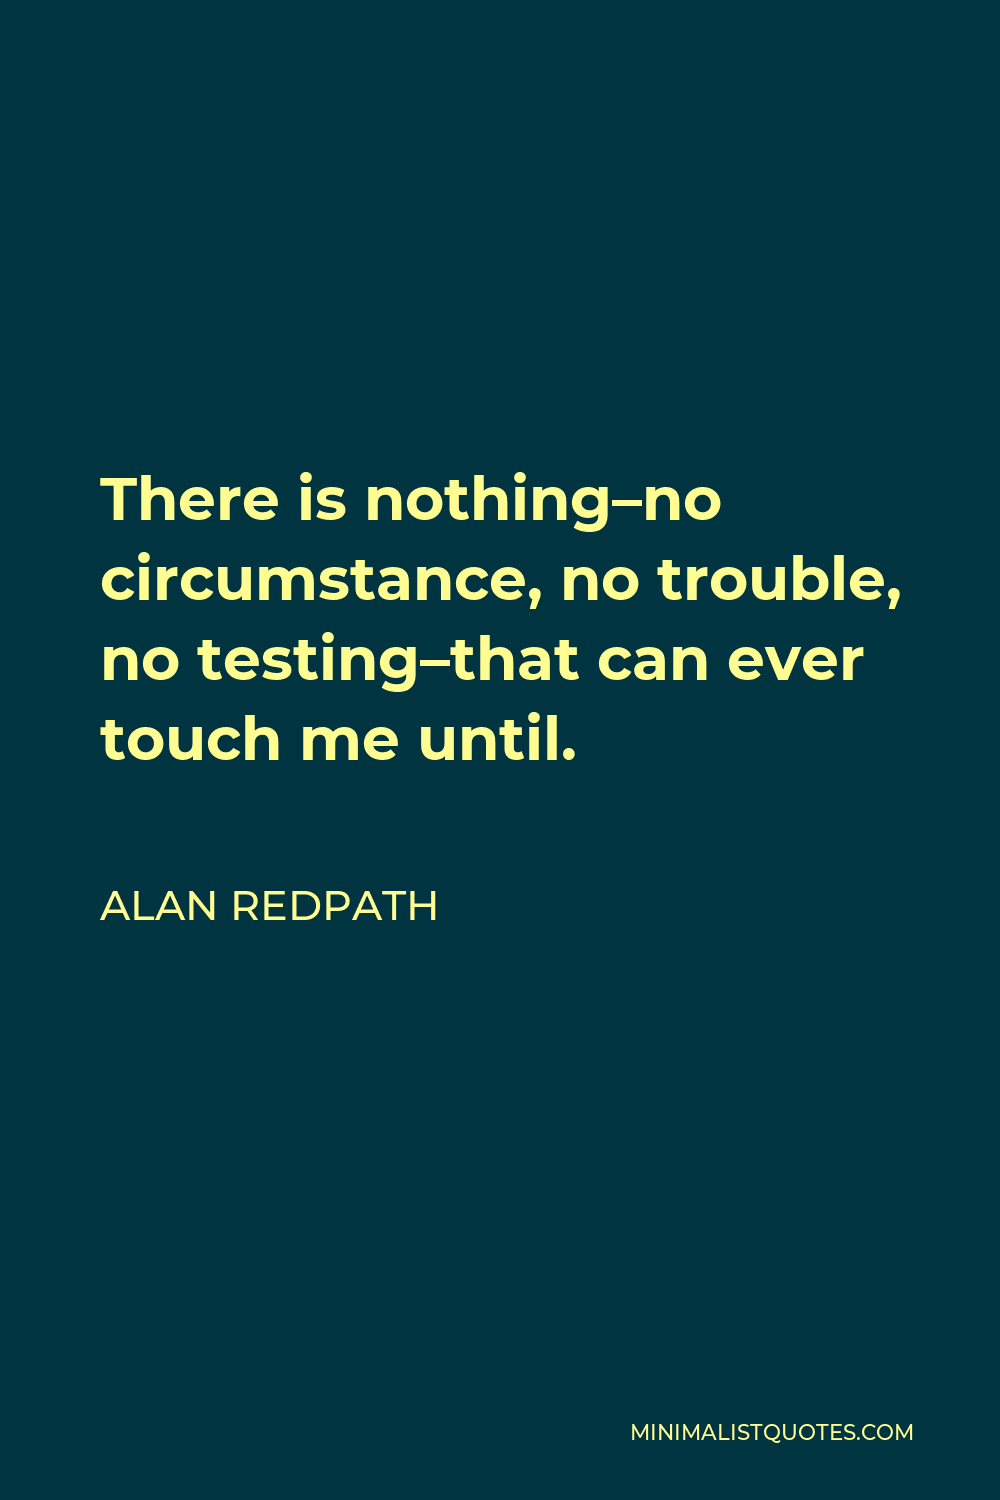 Alan Redpath Quote - There is nothing–no circumstance, no trouble, no testing–that can ever touch me until.